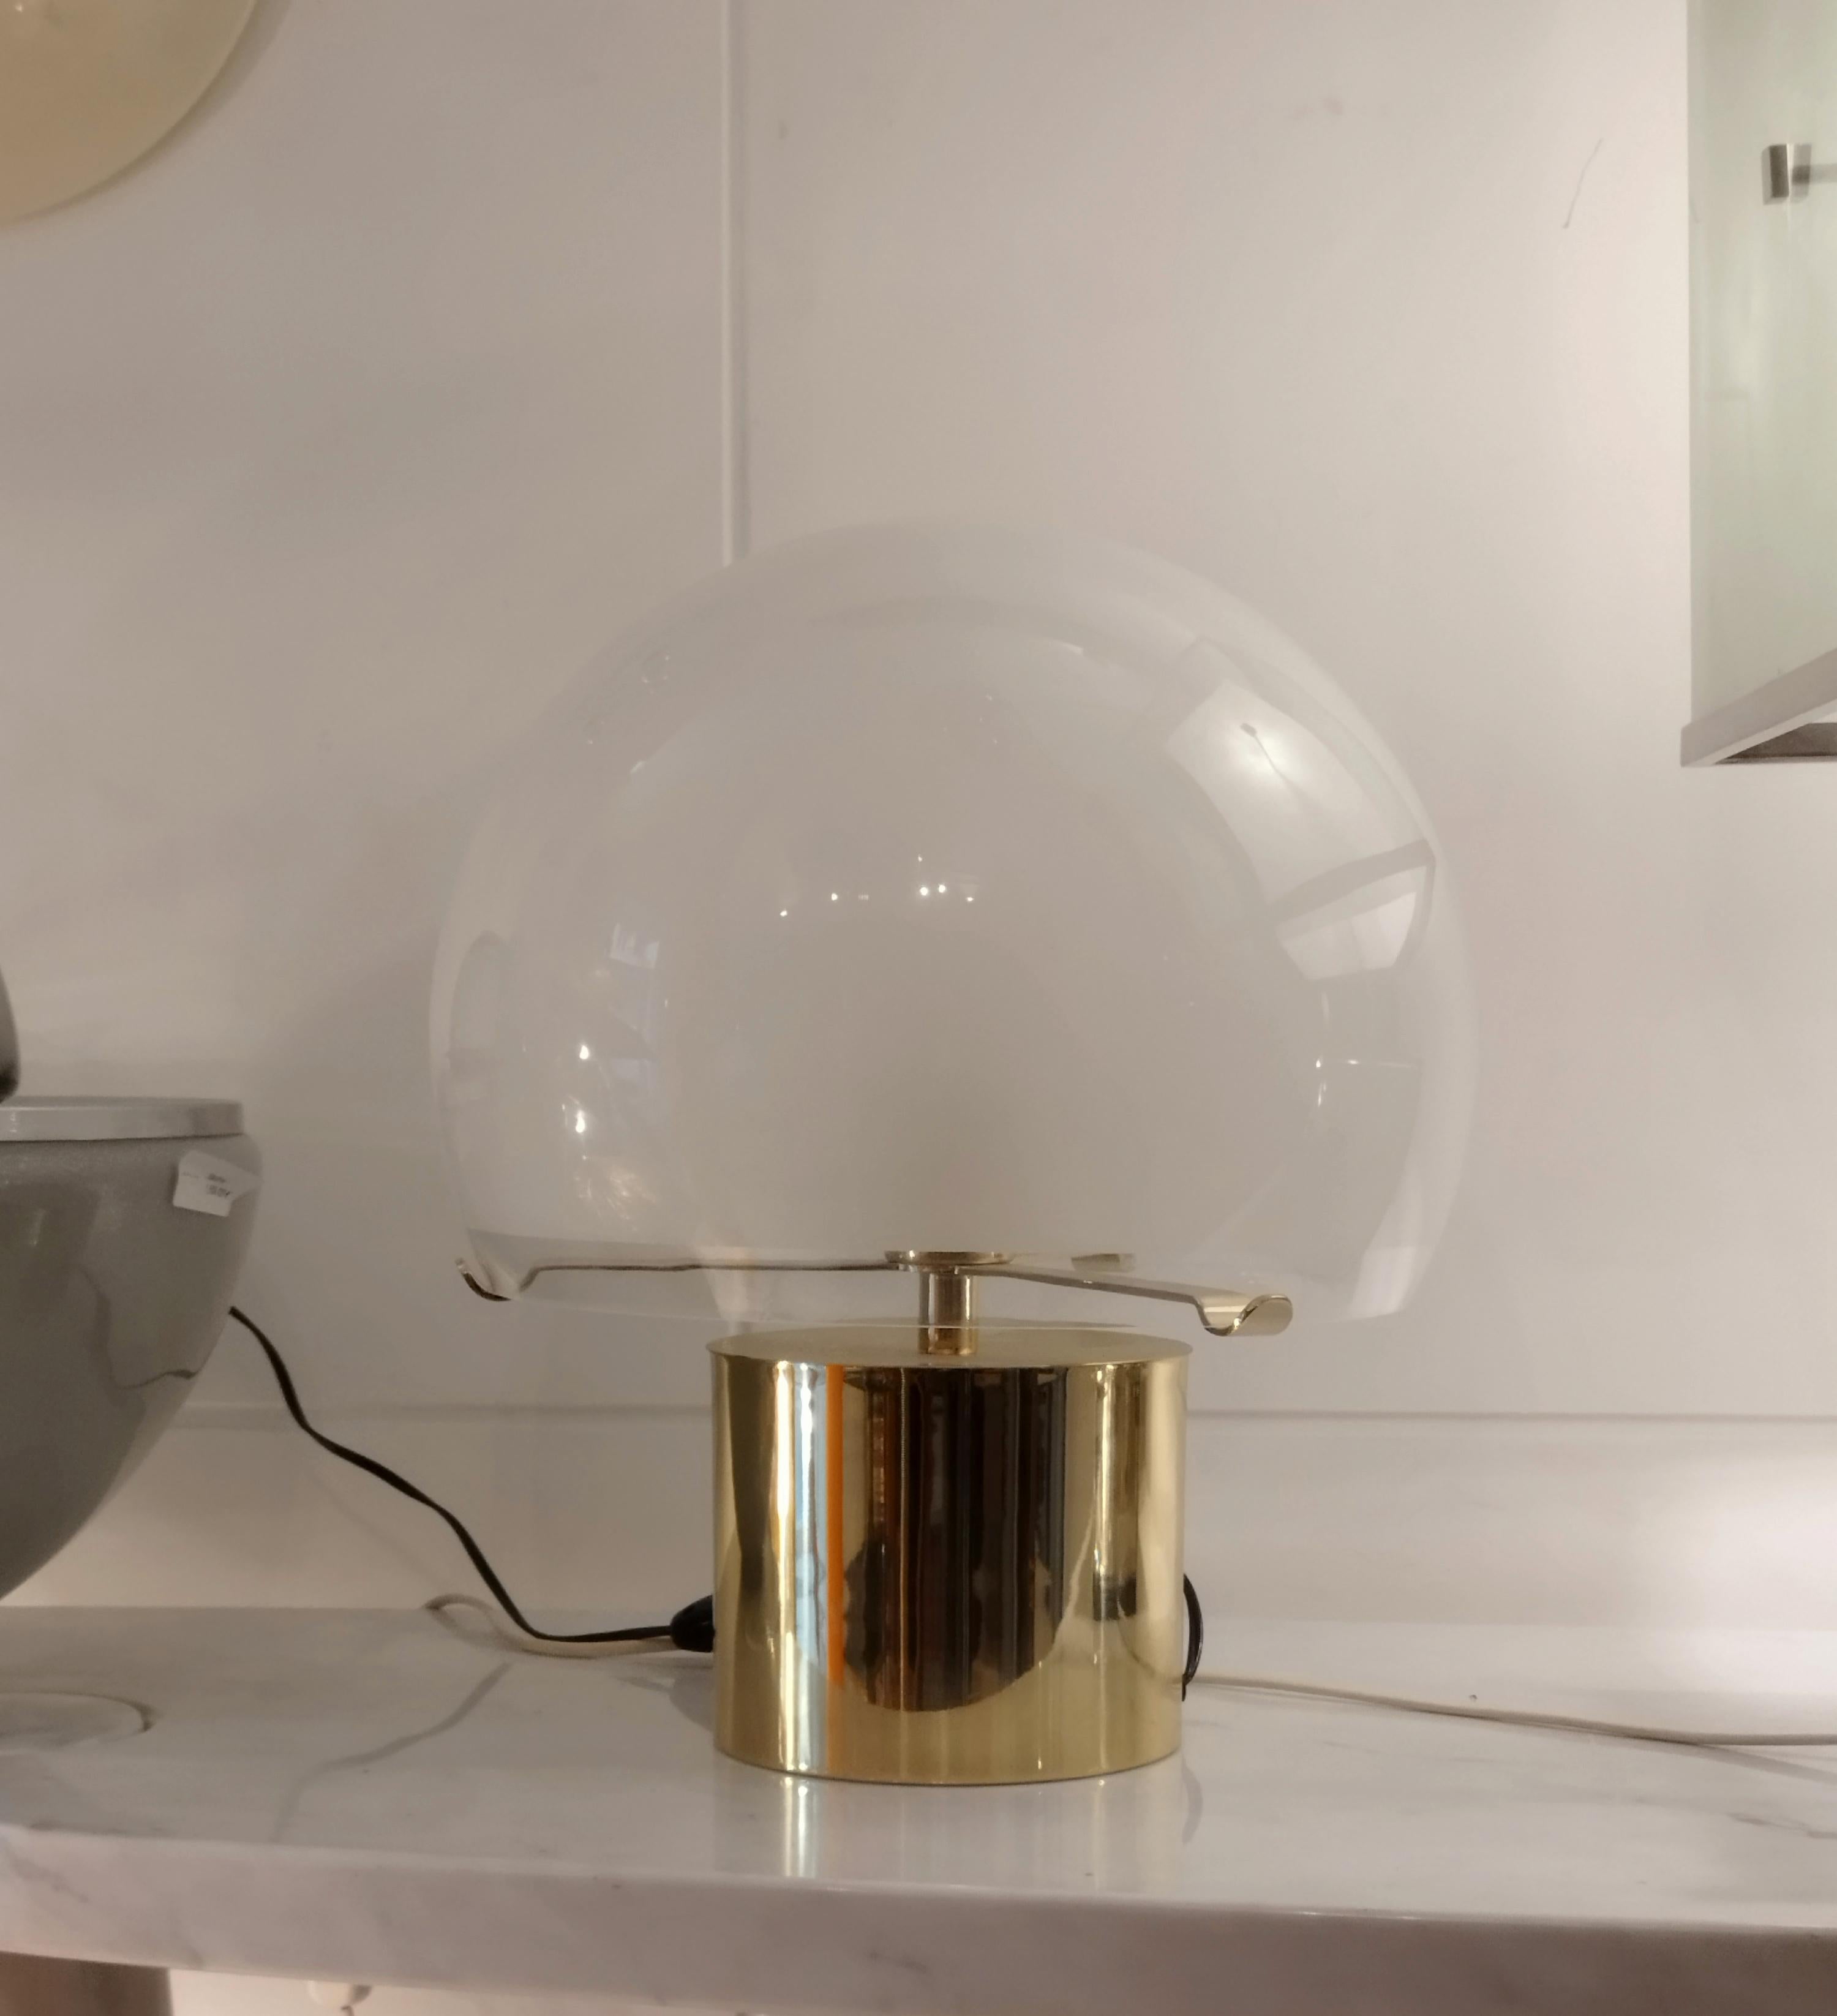 Porcino' modern table lamp in brass and frosted glass. By Luigi Caccia Dominioni, Italy, 1966.
This spherical lamp was designed by Luigi Caccia Dominioni for Azucena. The design is reminiscent of the Space Age style of the mid to late 1960s. The